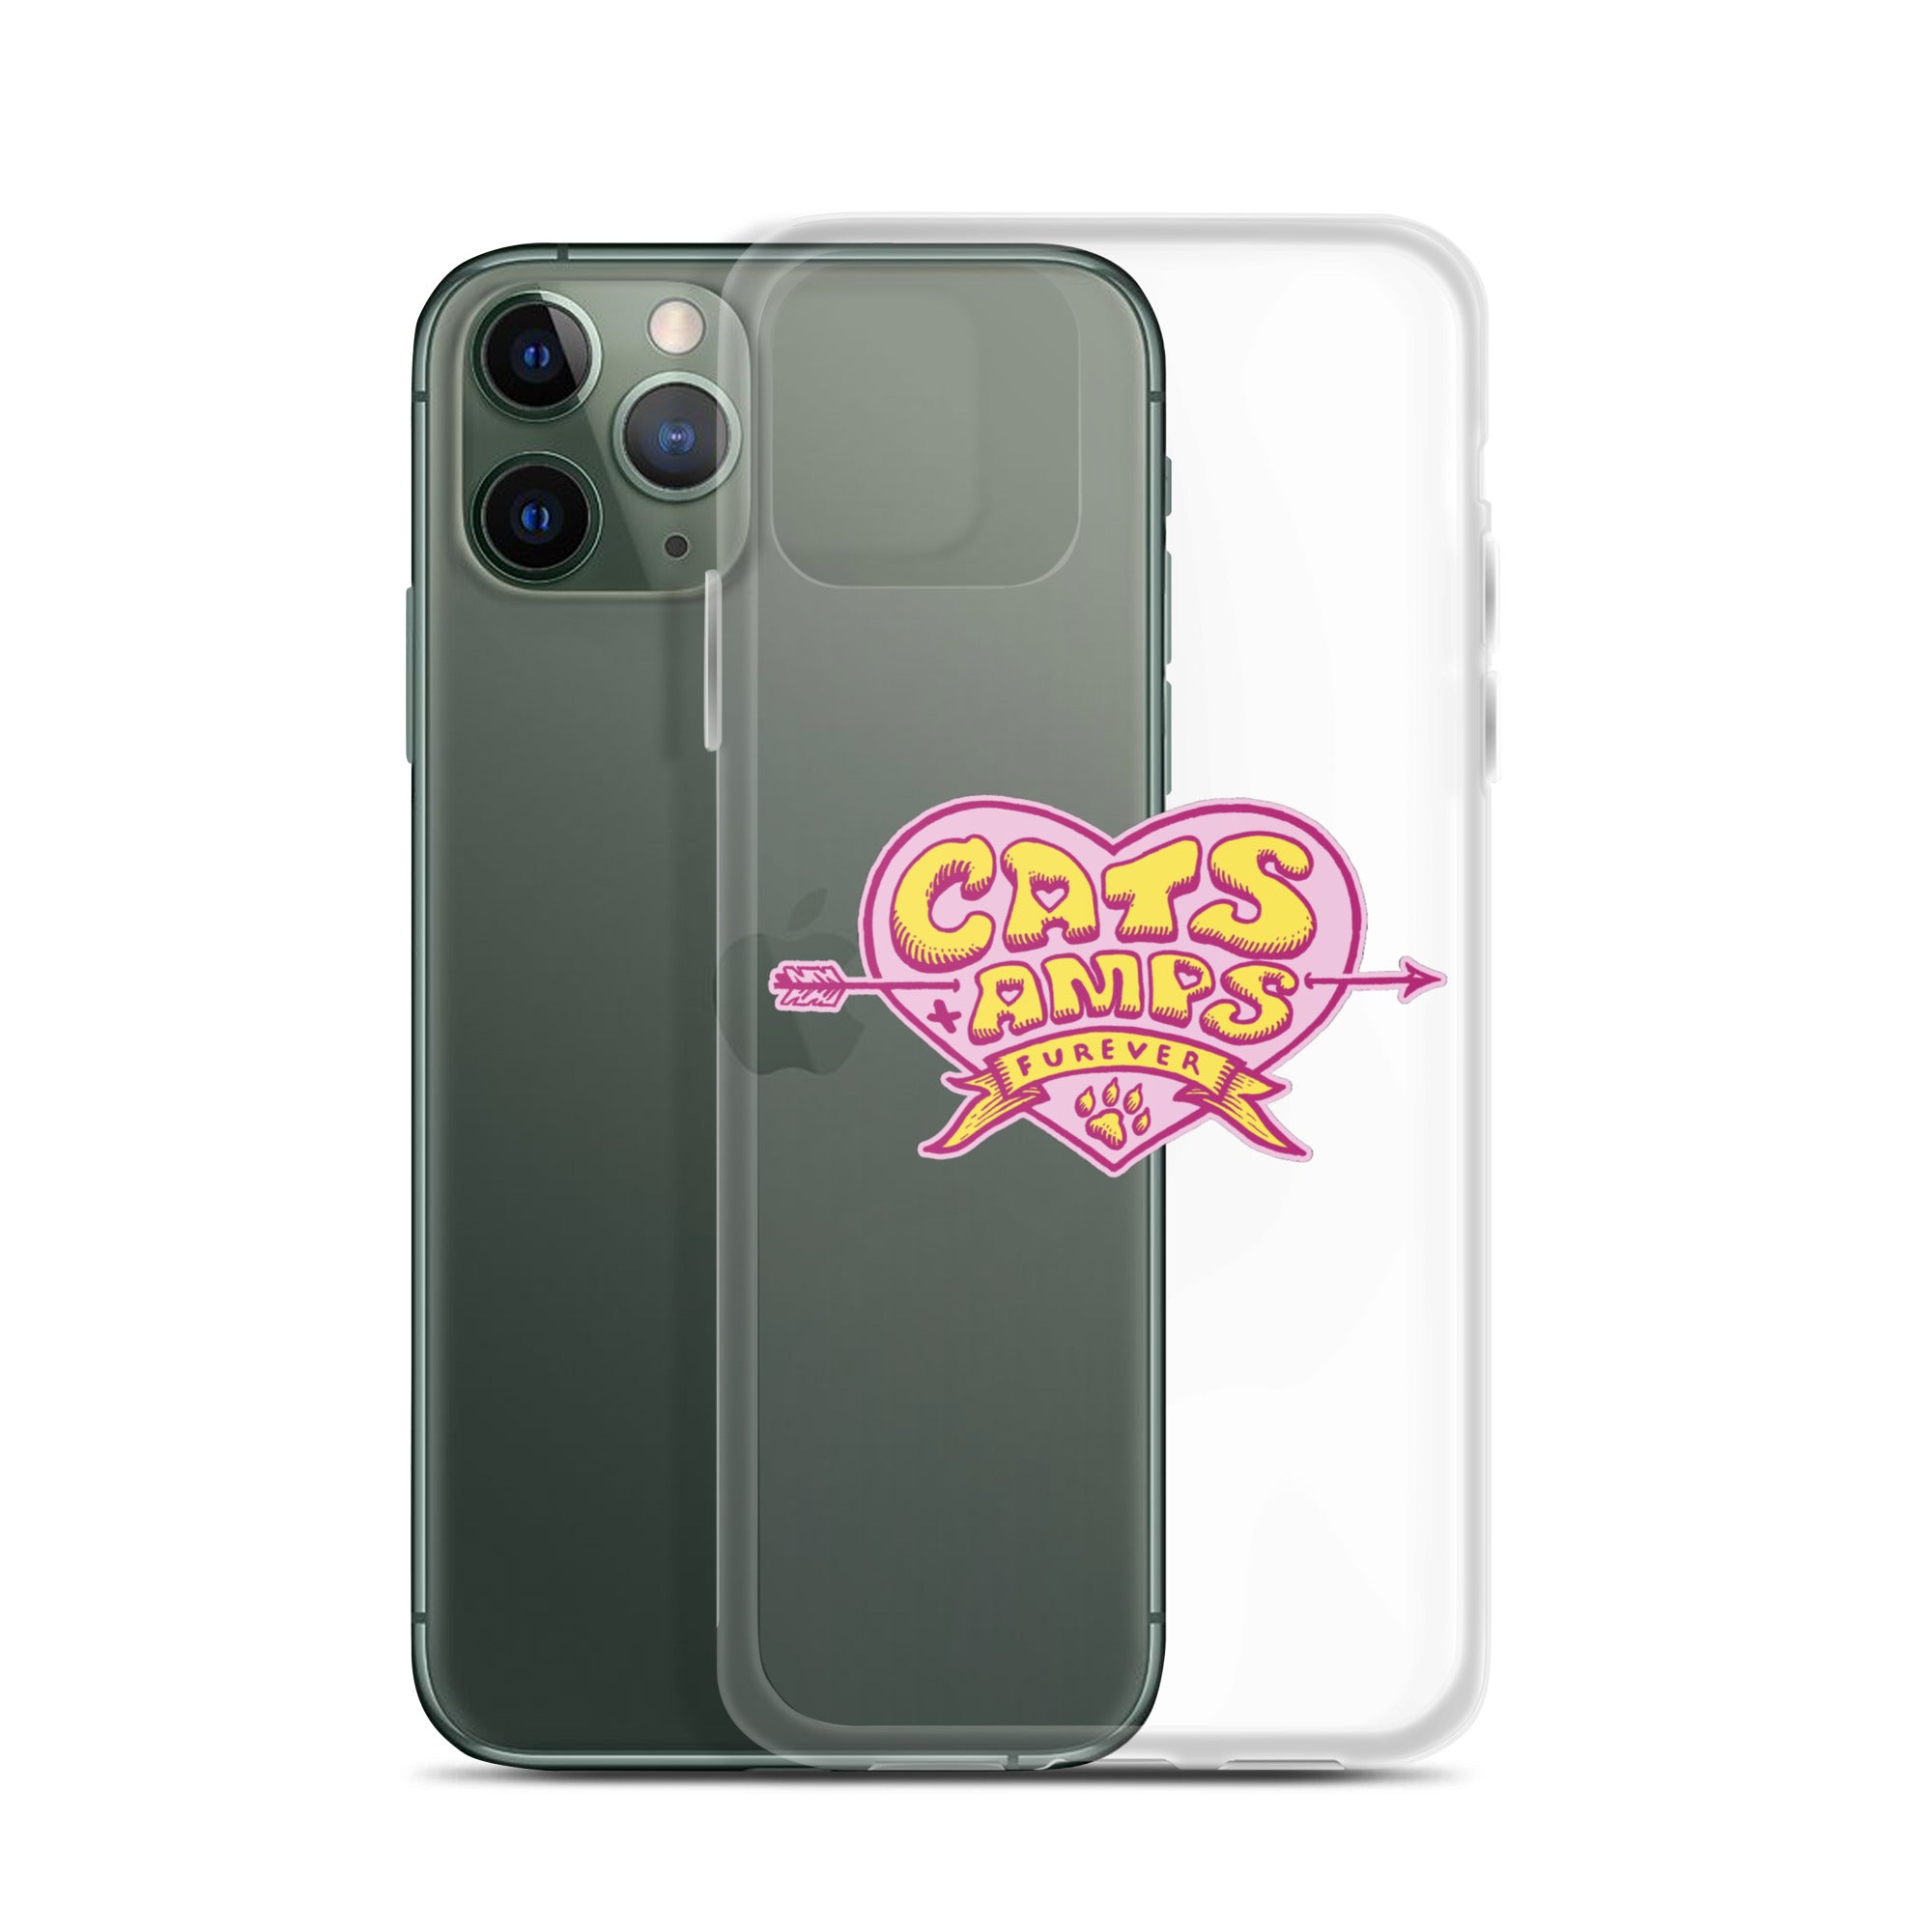 CATS ON AMPS - Valentines -  Clear Phone Case